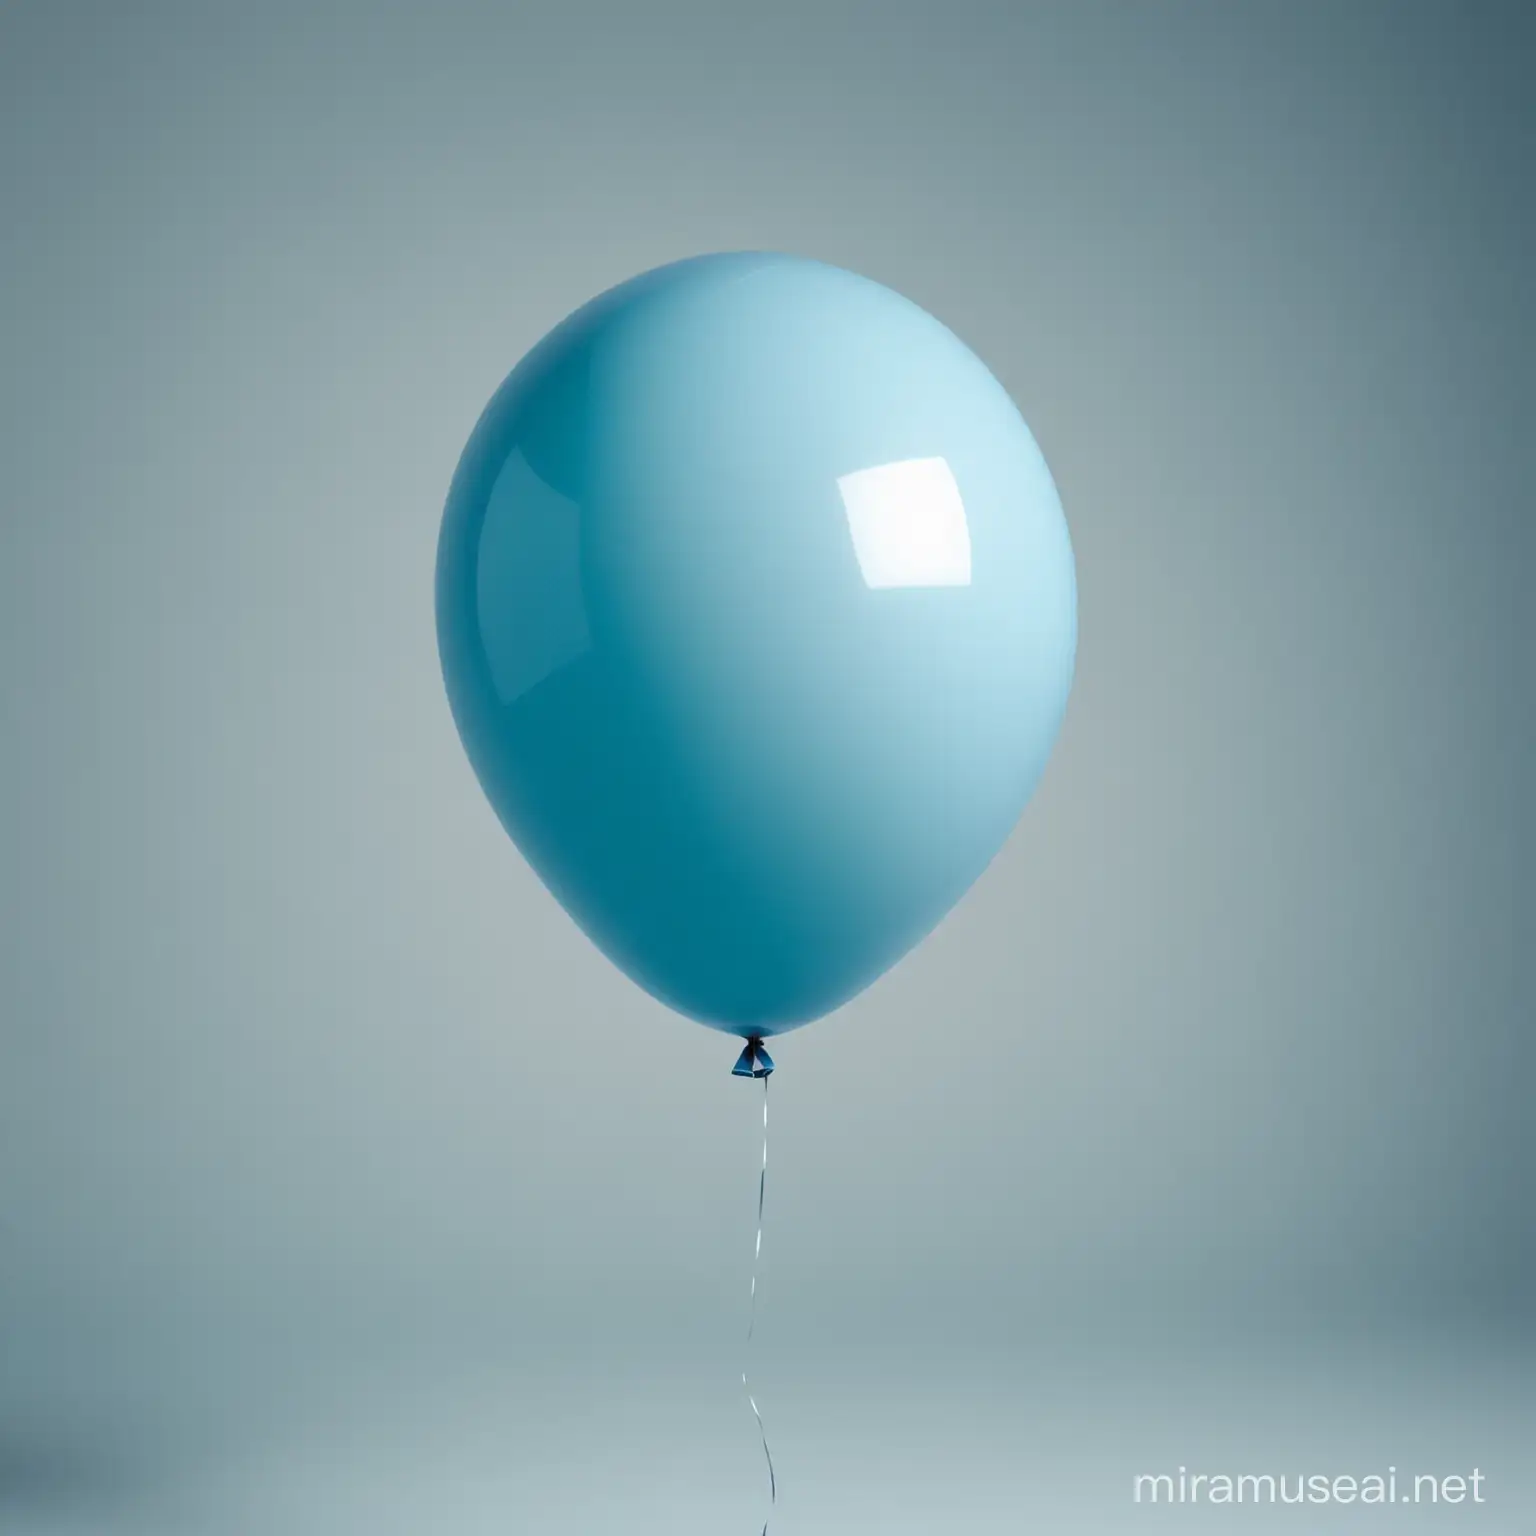 The Image Shows blue balloon. The balloon is set against an isolated background. It is the perfect balloon with a symmetrical, geometric and beautiful shape.